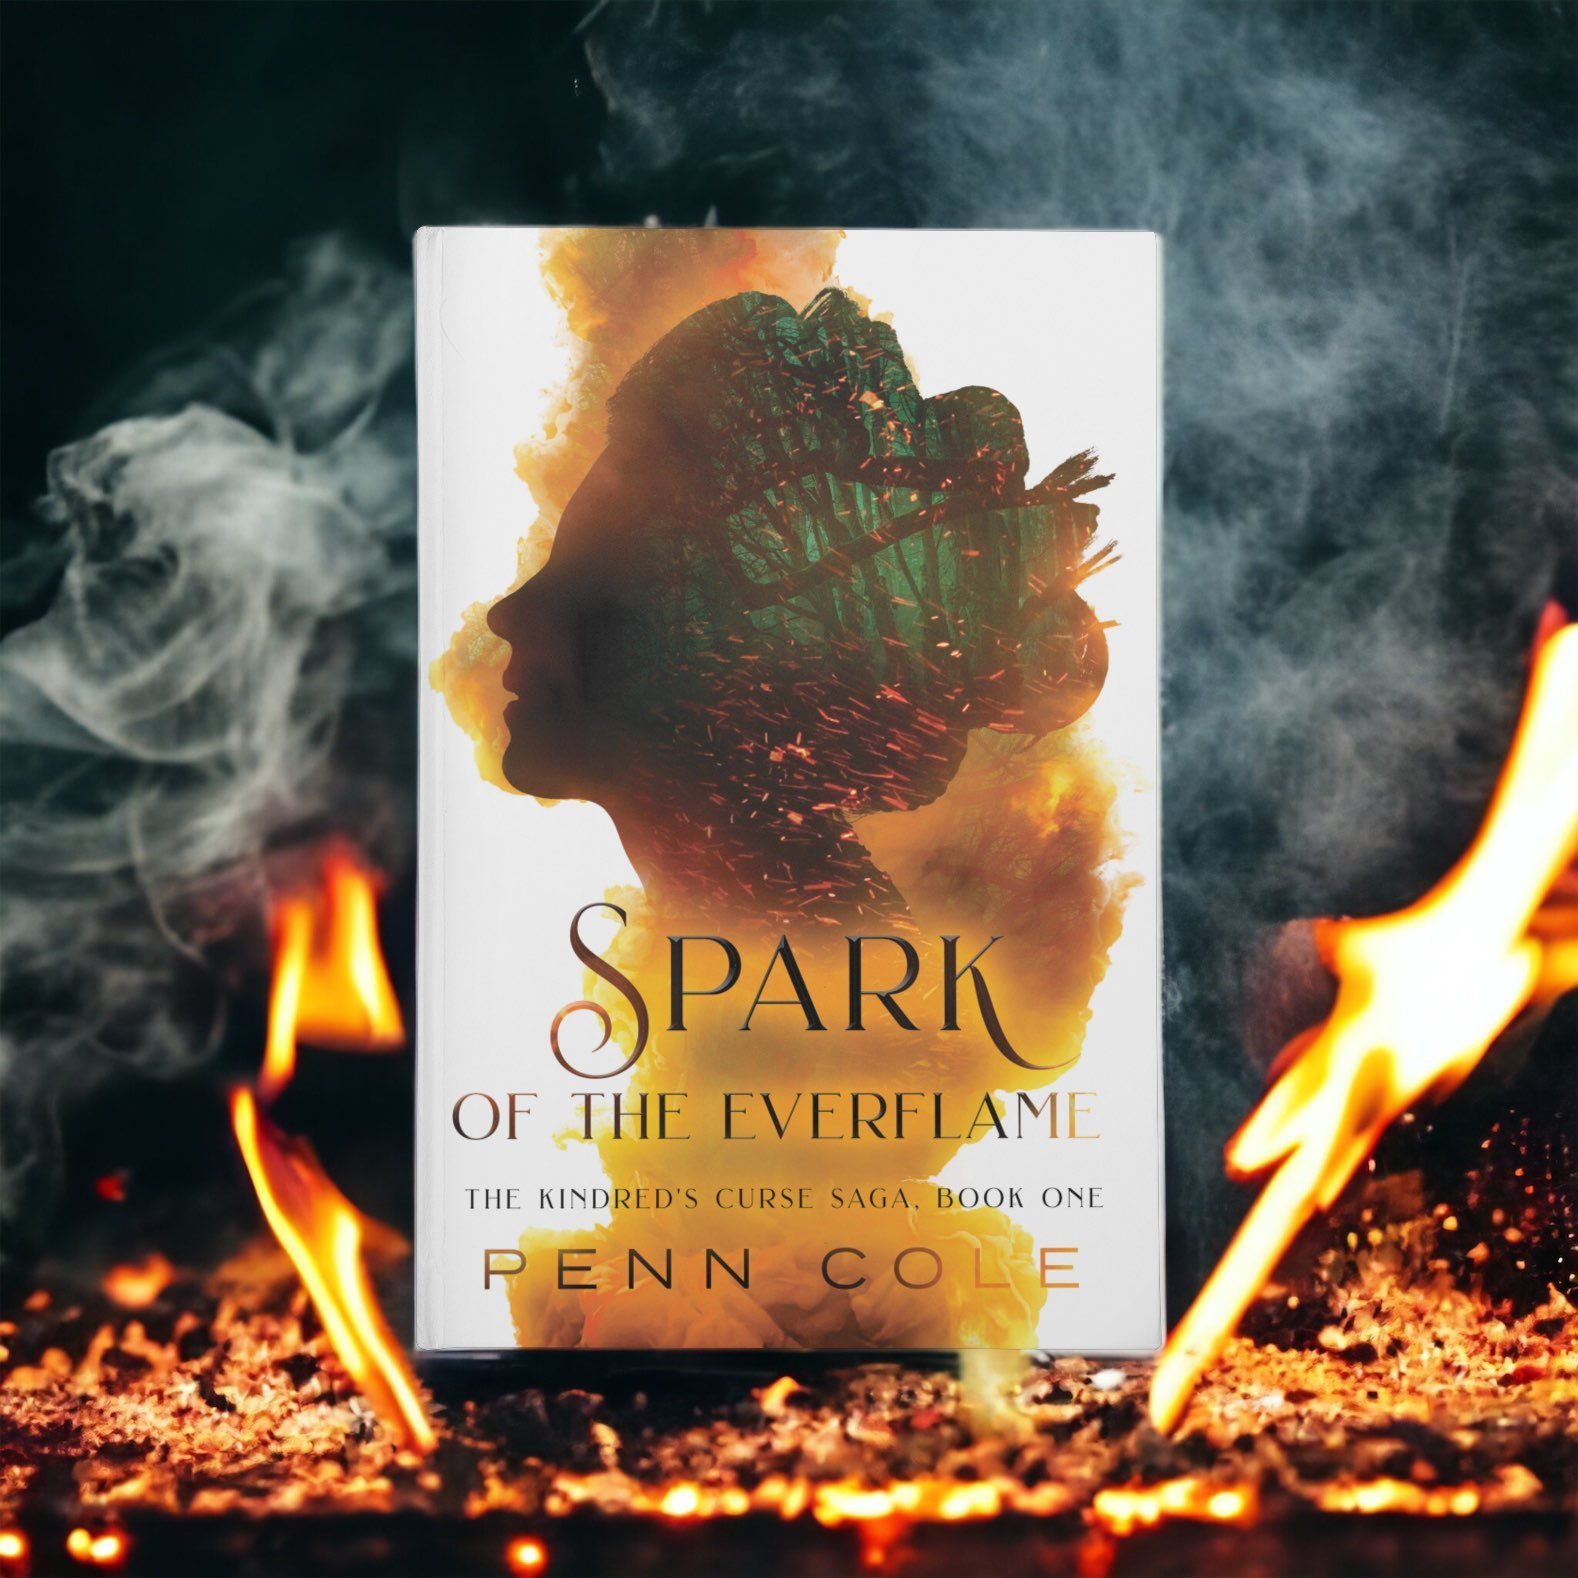 Spark of the Everflame: The Kindred's Curse Saga, Book One